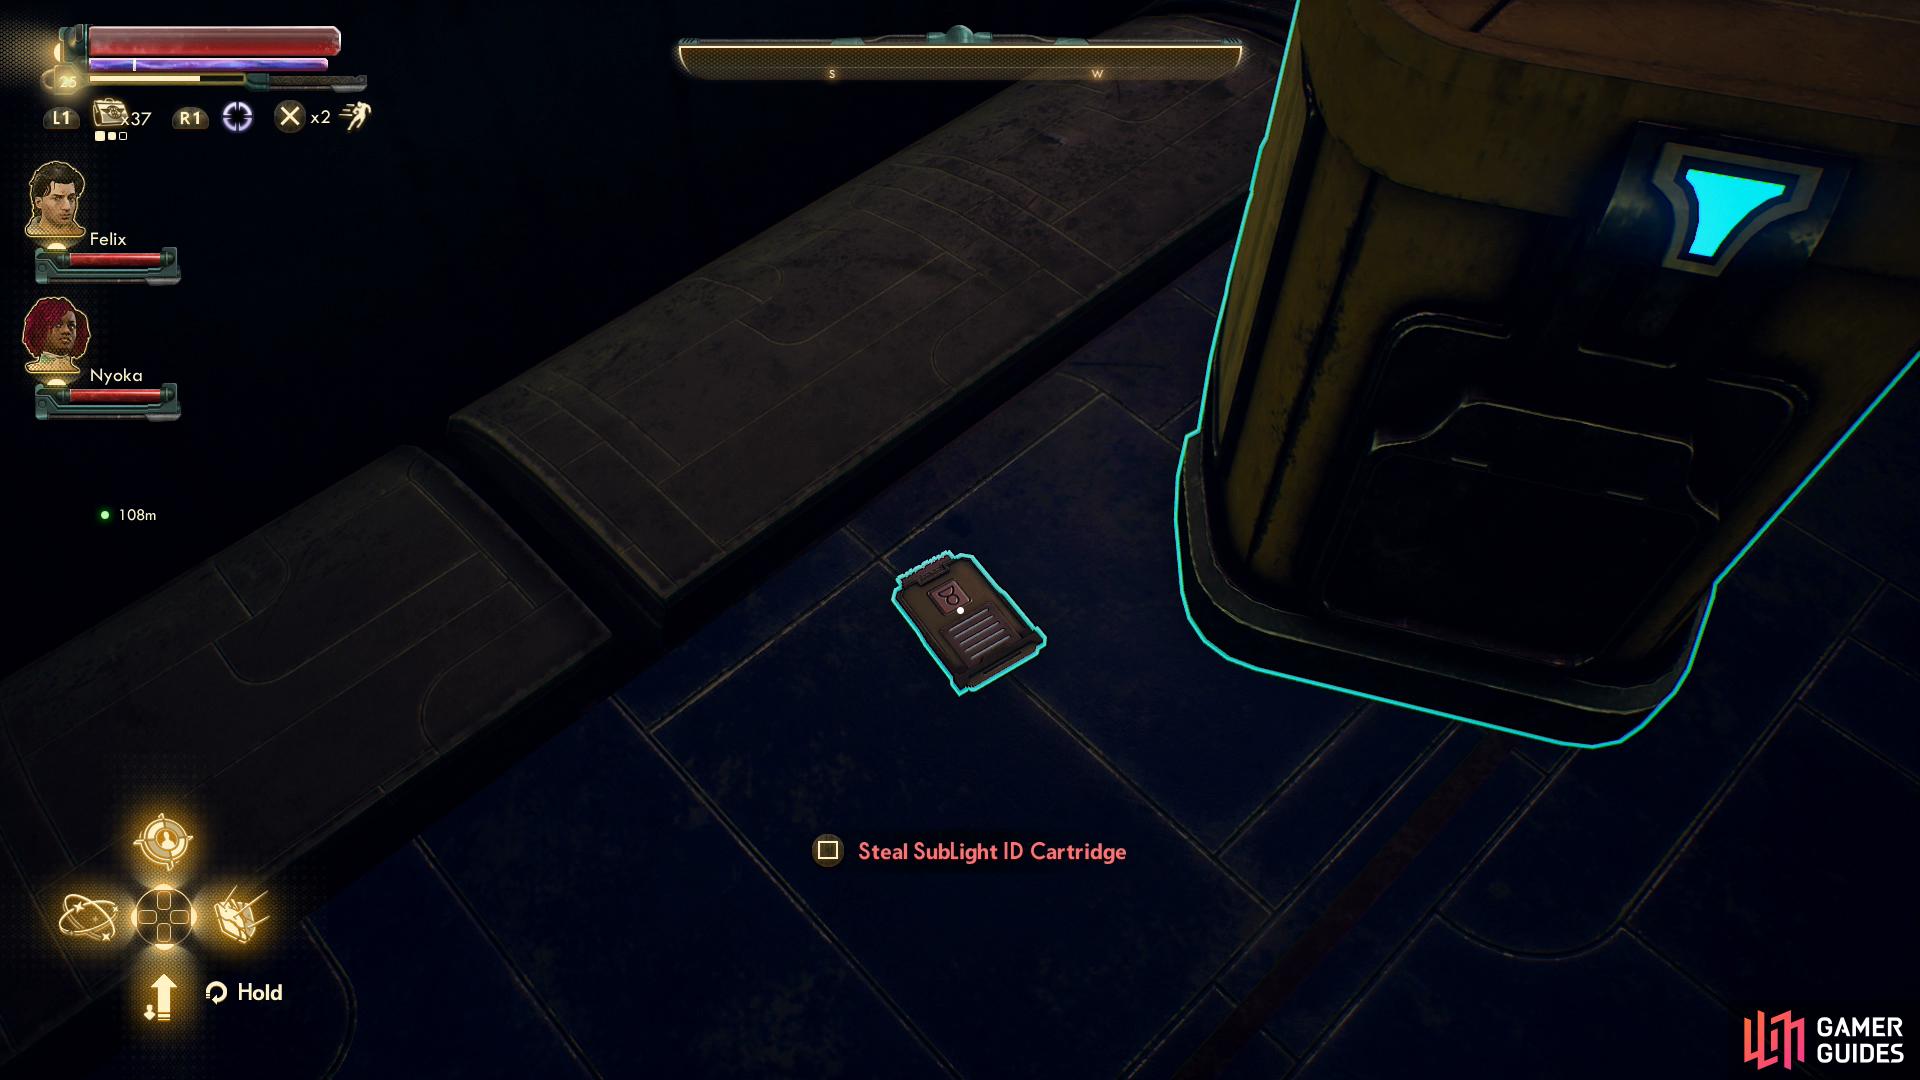 Up a ladder you can also score a SubLight ID Cartridge